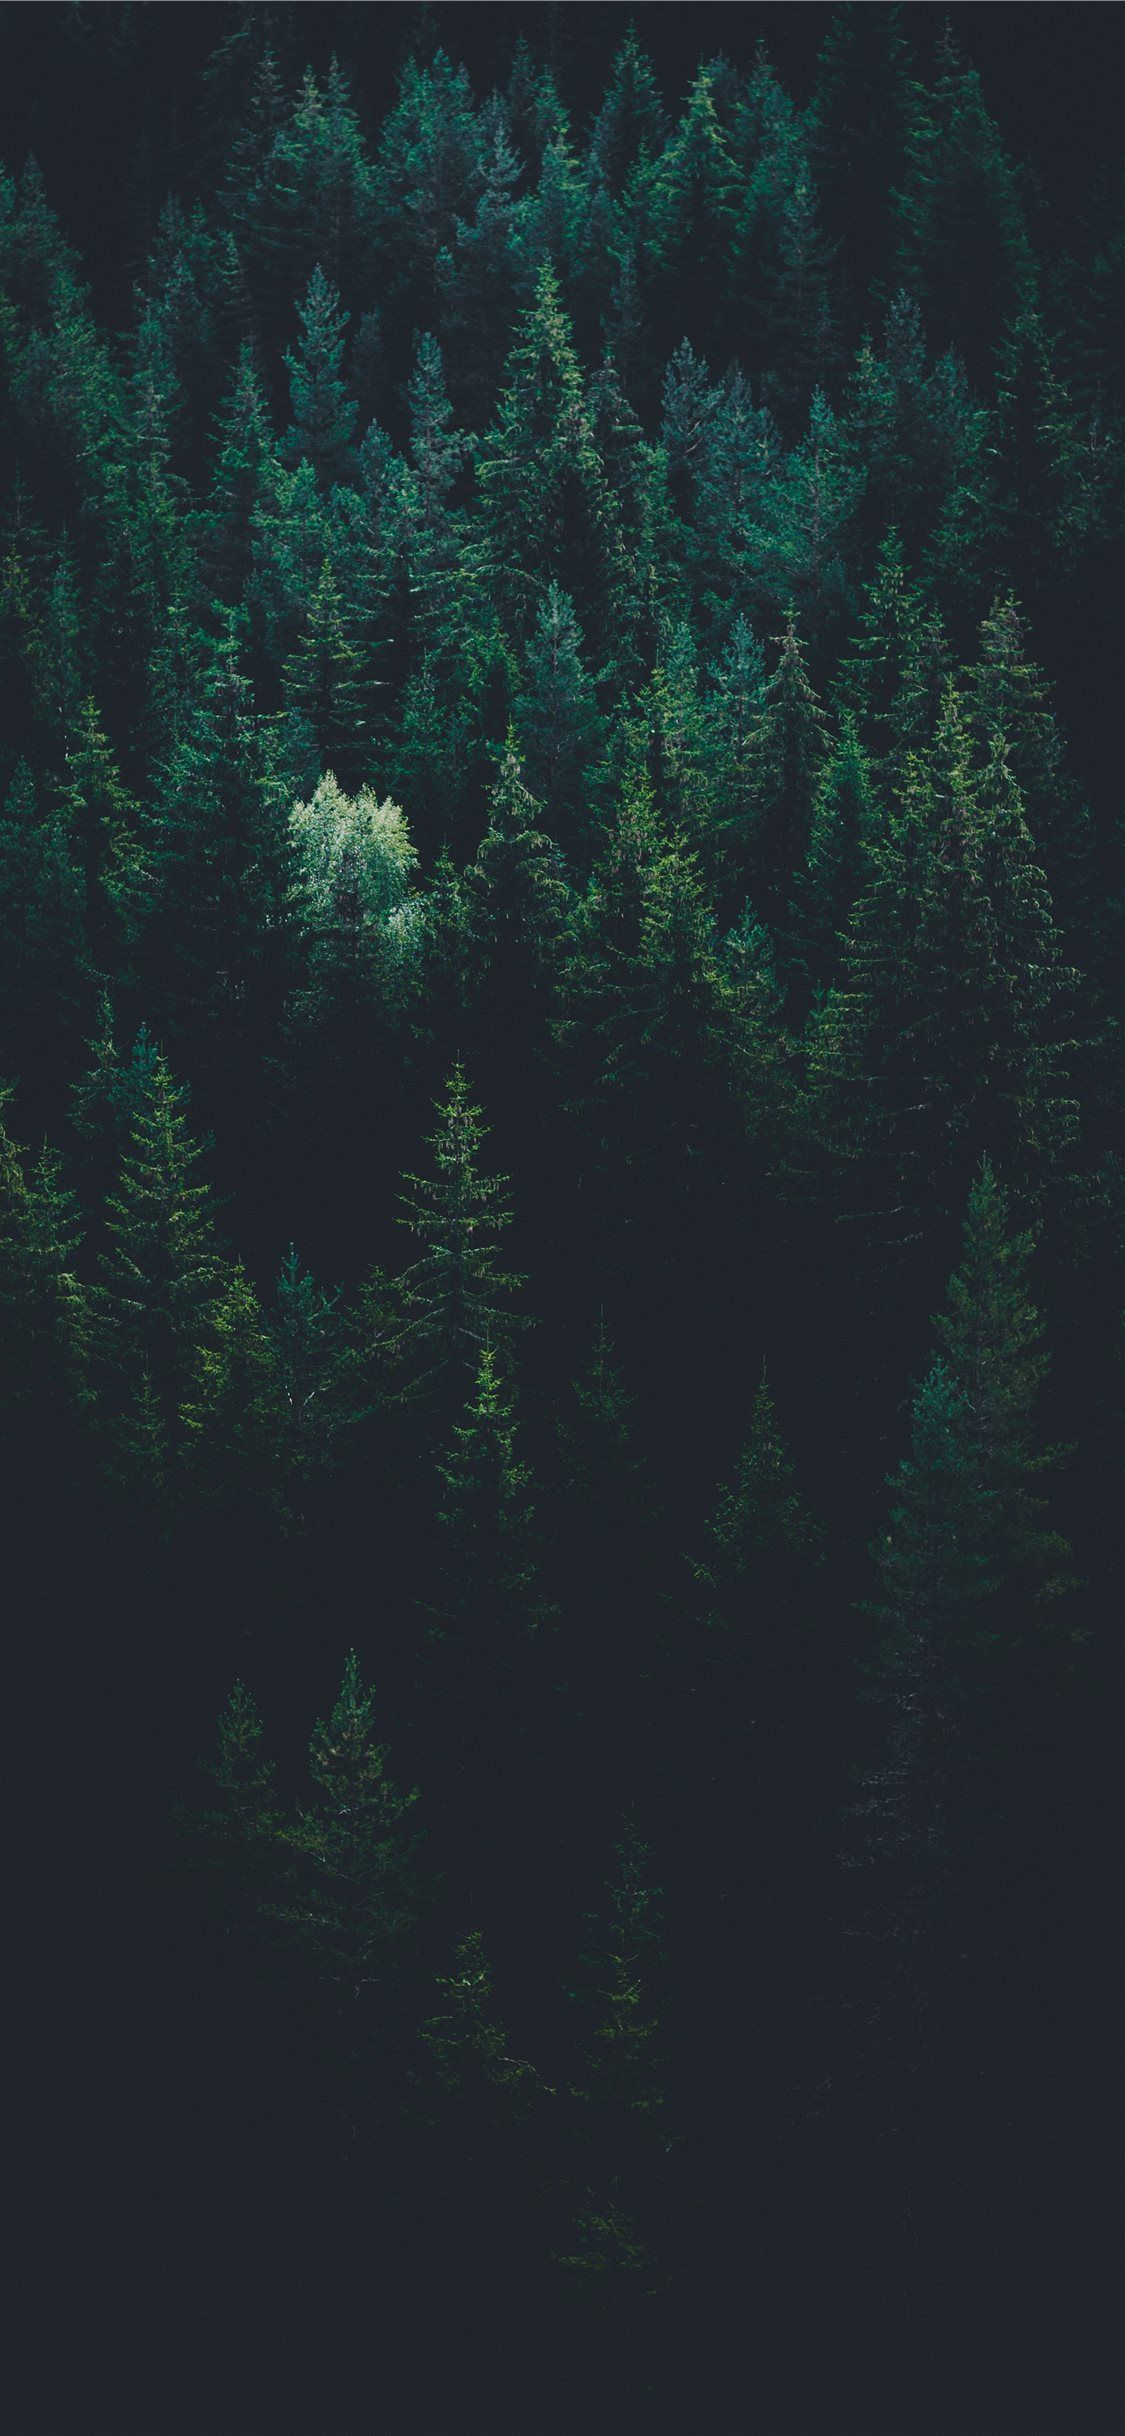 IPhone wallpaper of a forest of trees in the dark - Dark green, forest